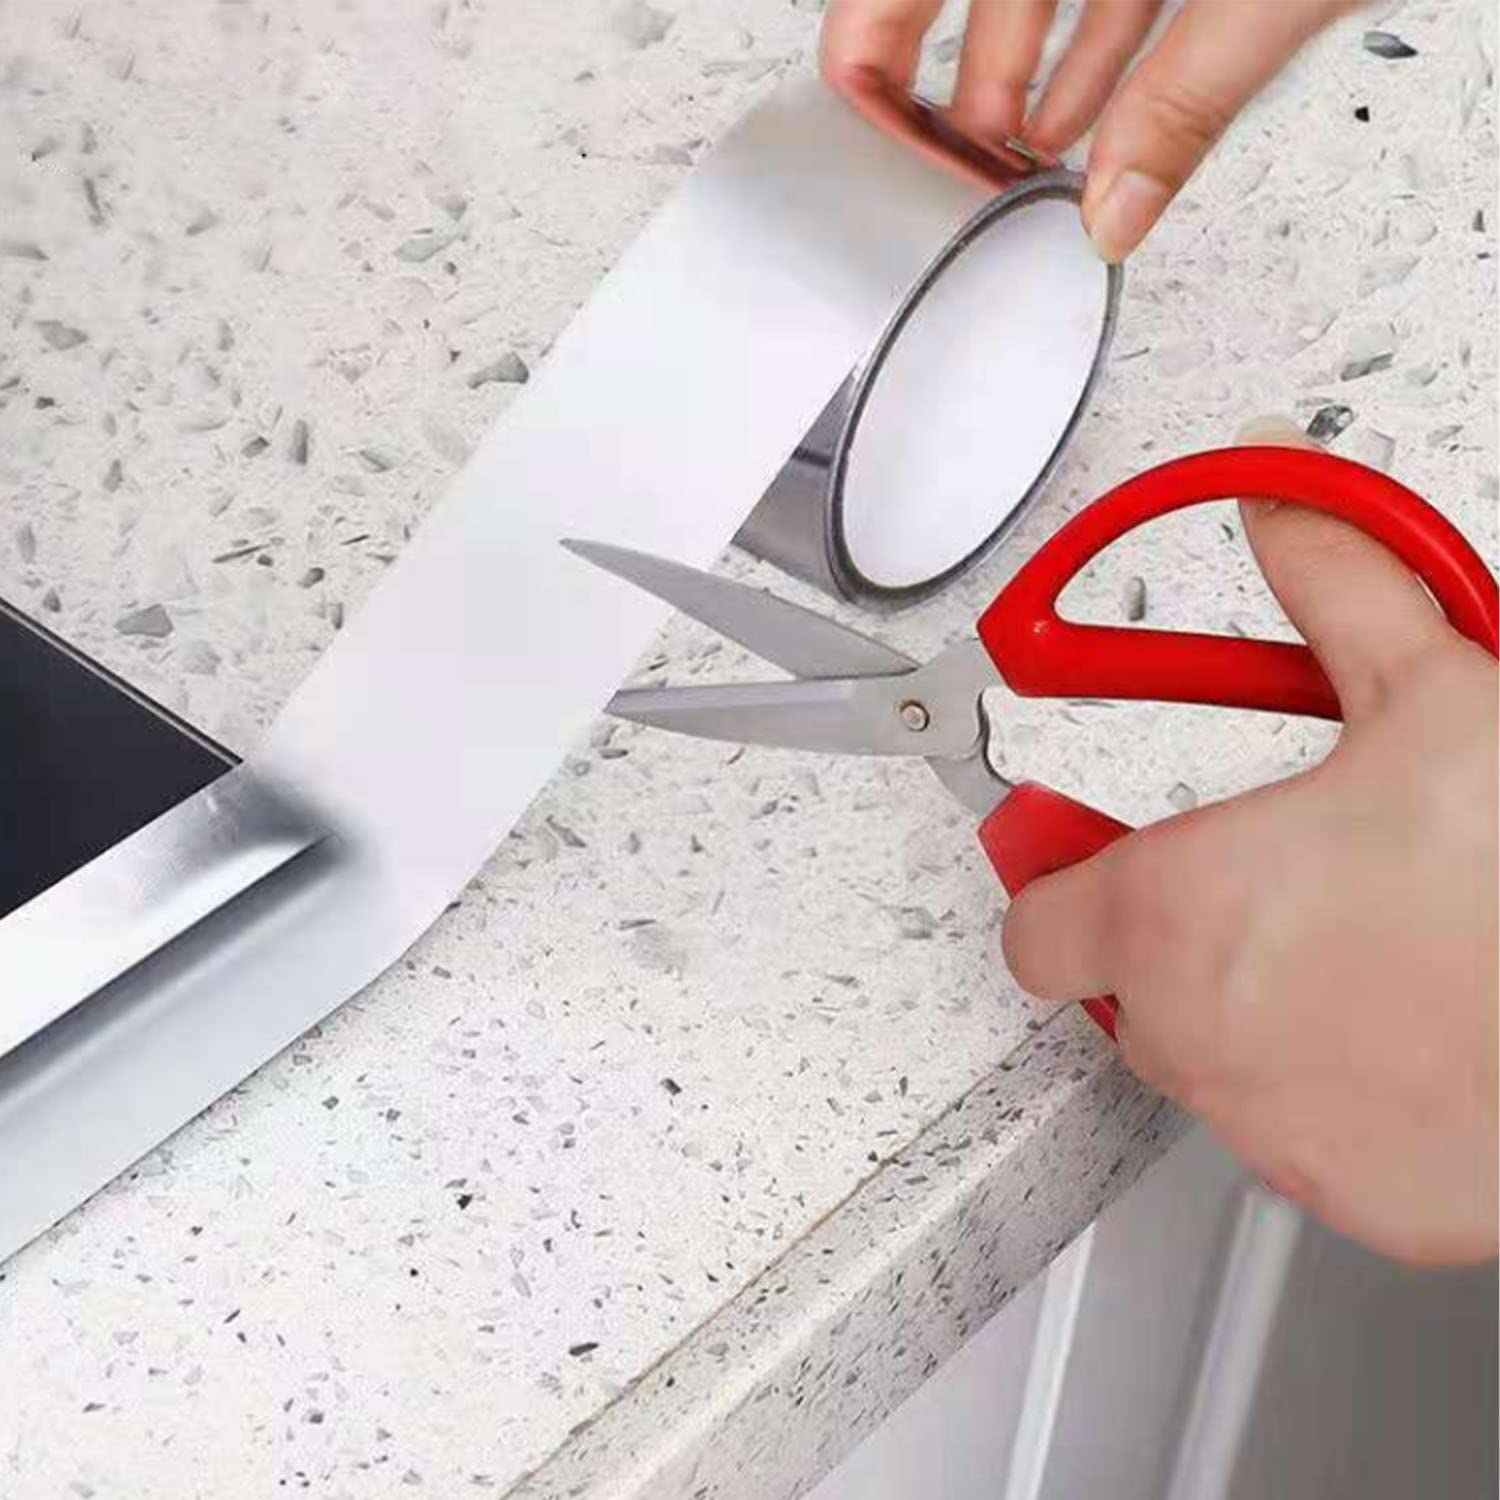 A person cutting Leakproof Aluminum Foil Tape with a scissor after sticking it on a counter top